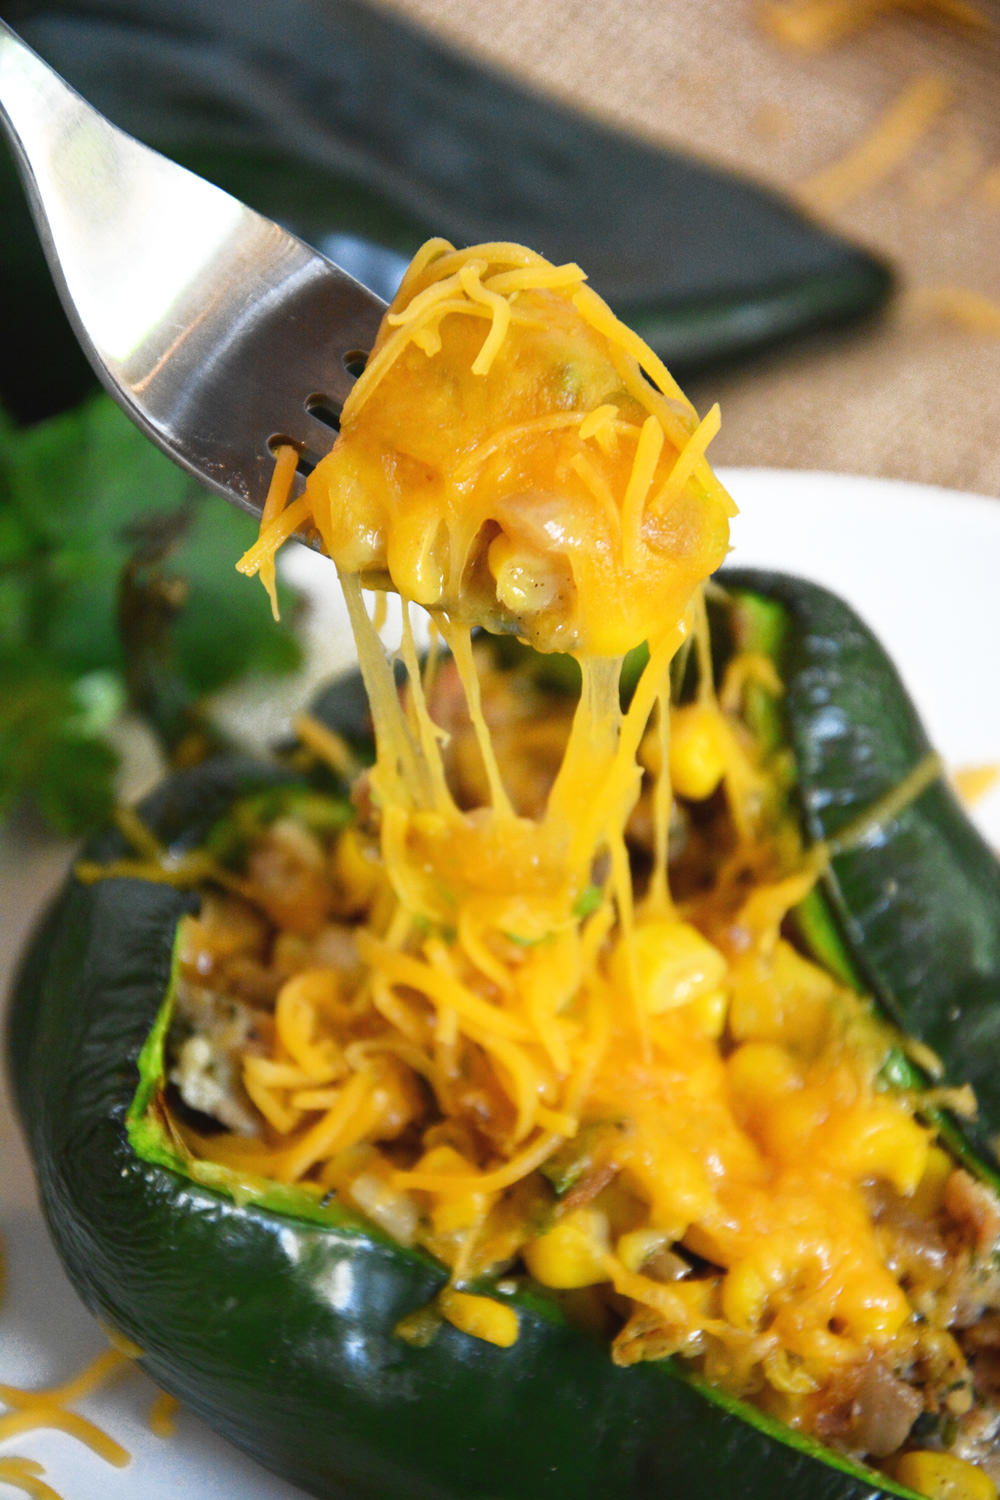 Stuffed poblano peppers loaded with flavorful chicken sausage, green chiles and fresh corn to make one nutrient dense meal!